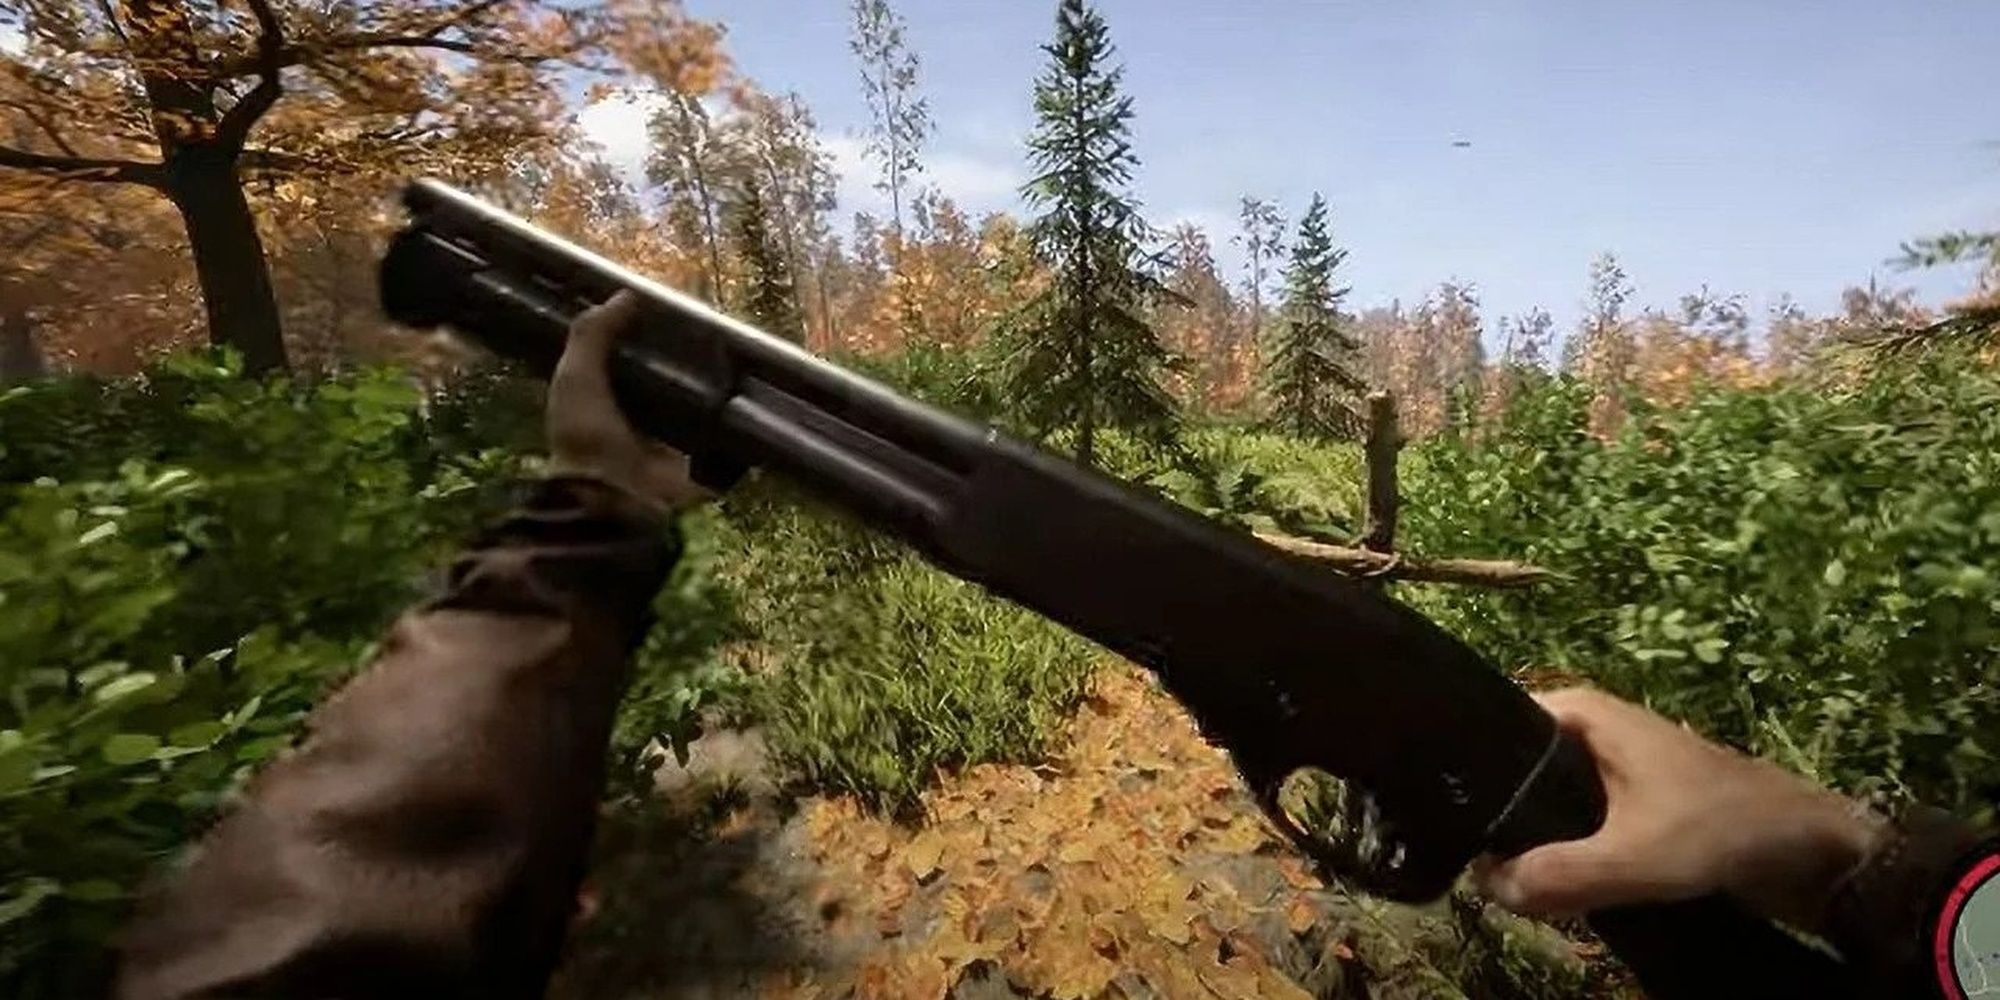 Sons Of The Forest: Inspecting The Shotgun In The Forest